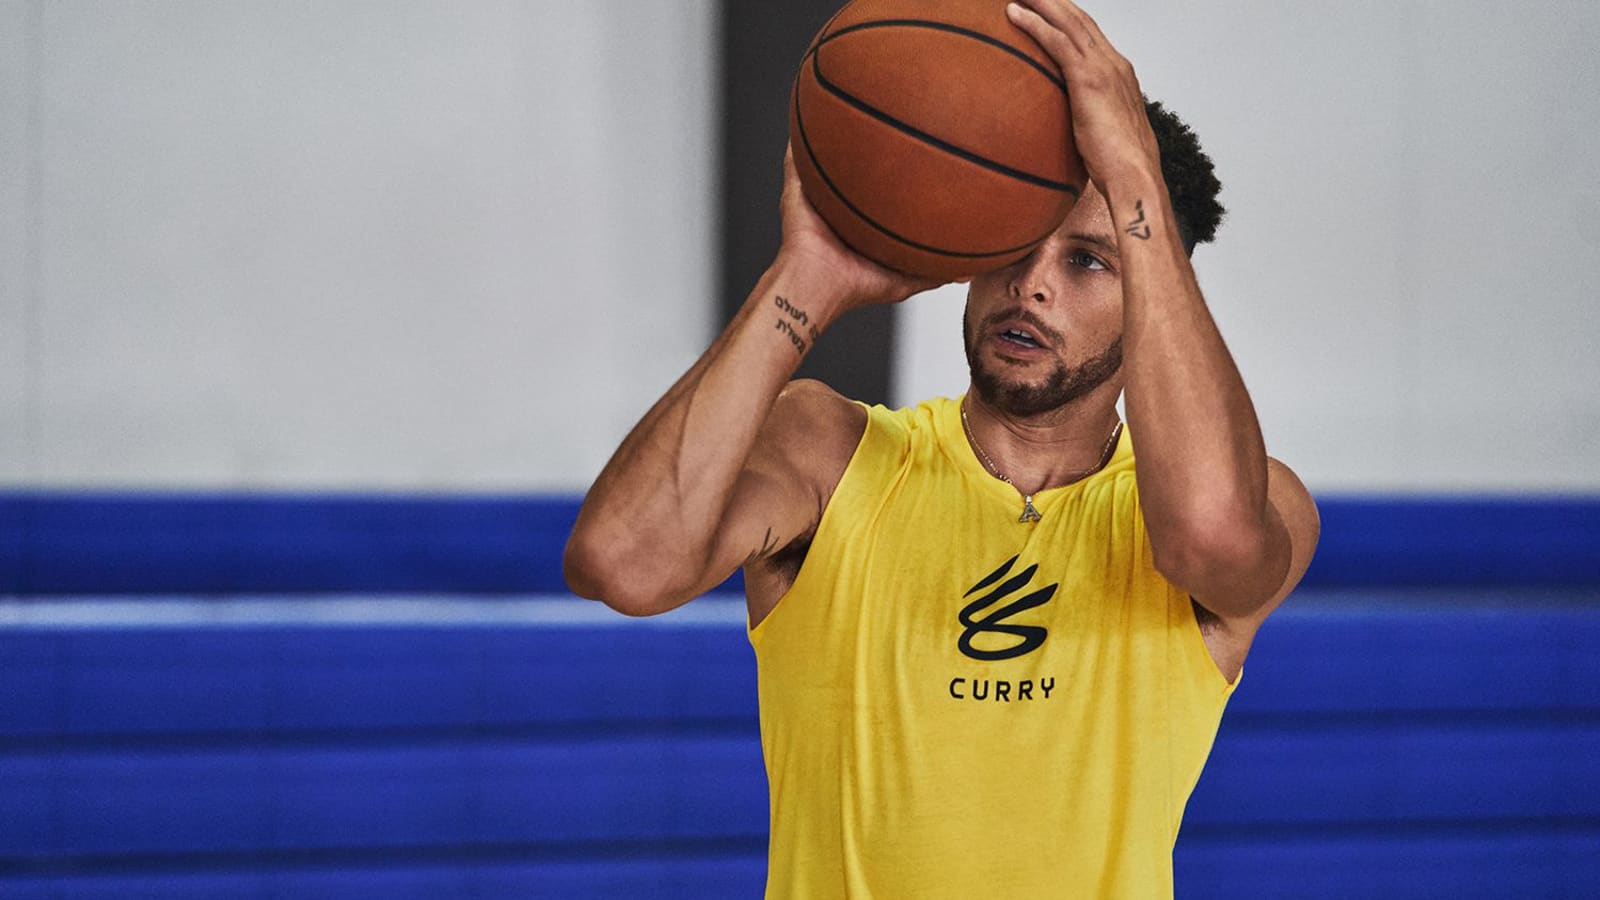 Under Armour a brand with NBA star Curry